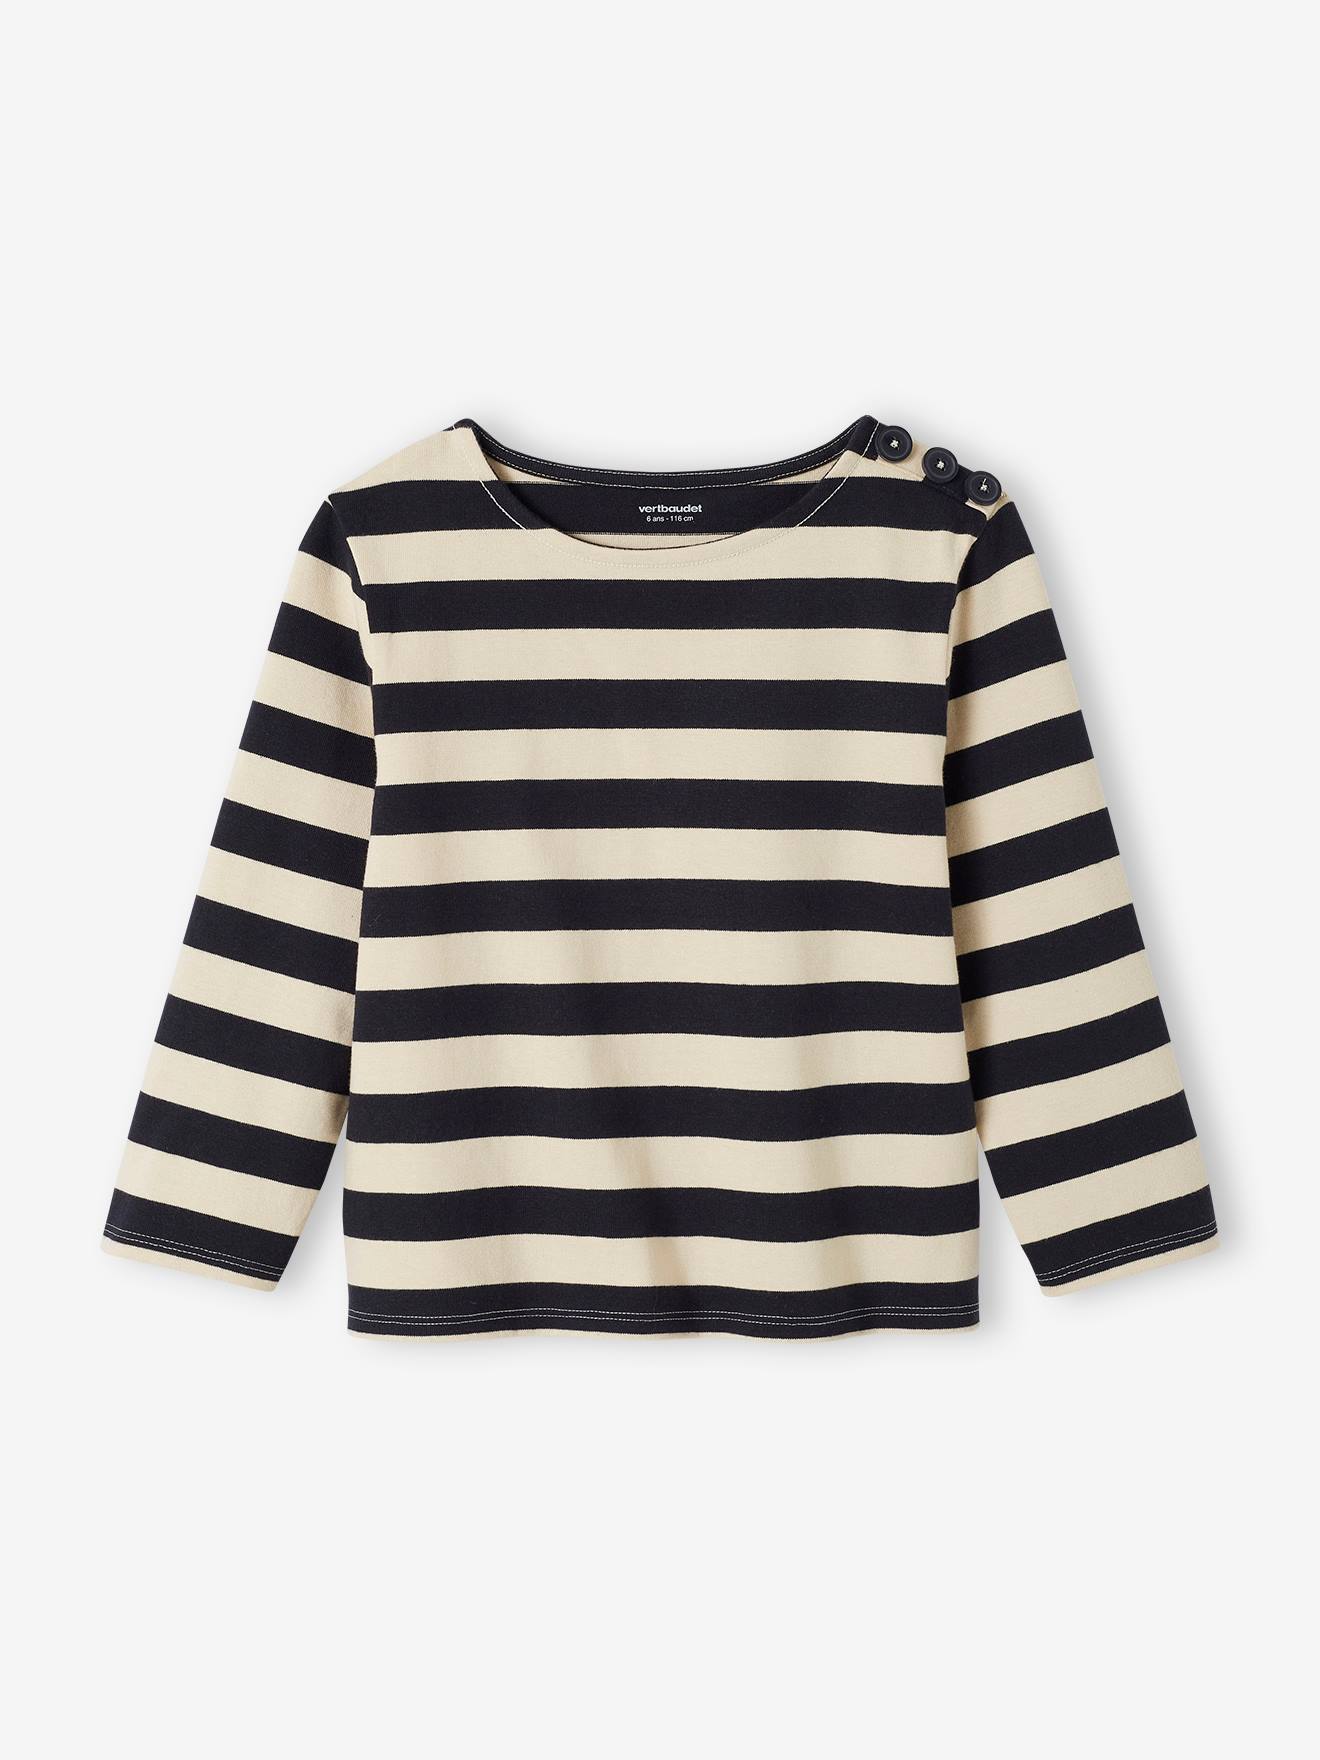 Sailor-Like Top, Long Sleeves, for Girls striped grey